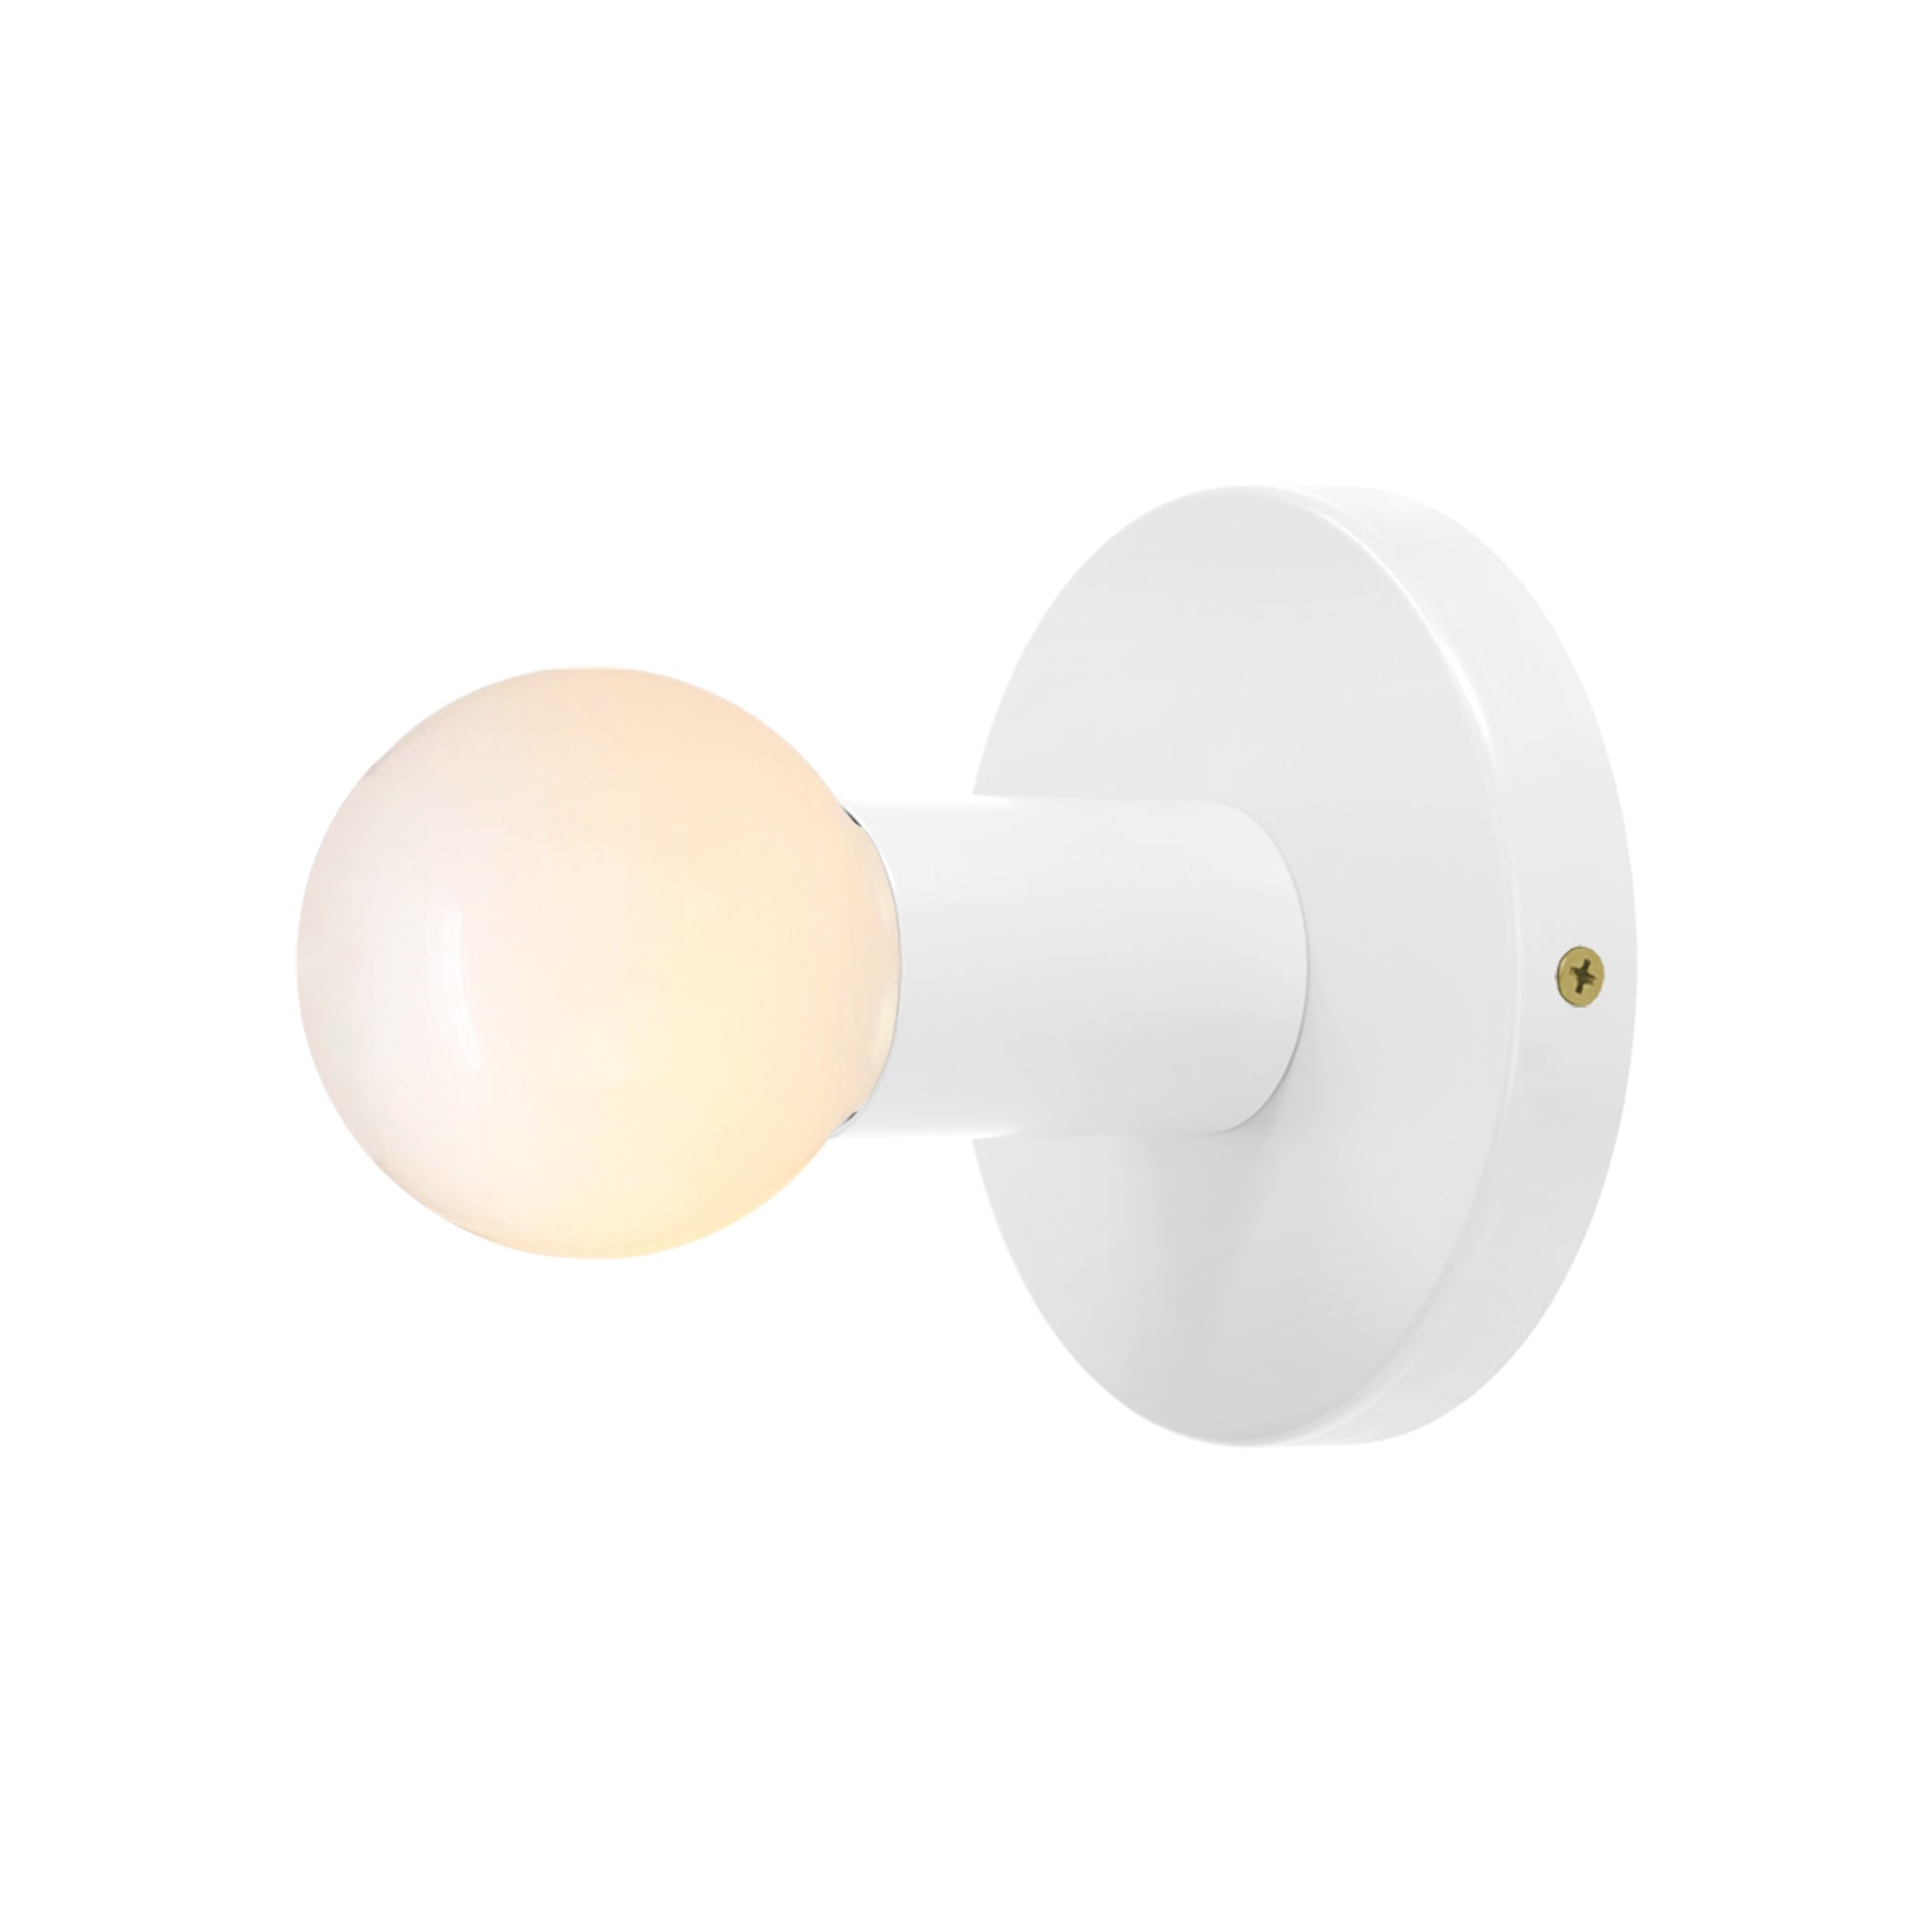 Brass and white color Twink sconce Dutton Brown lighting